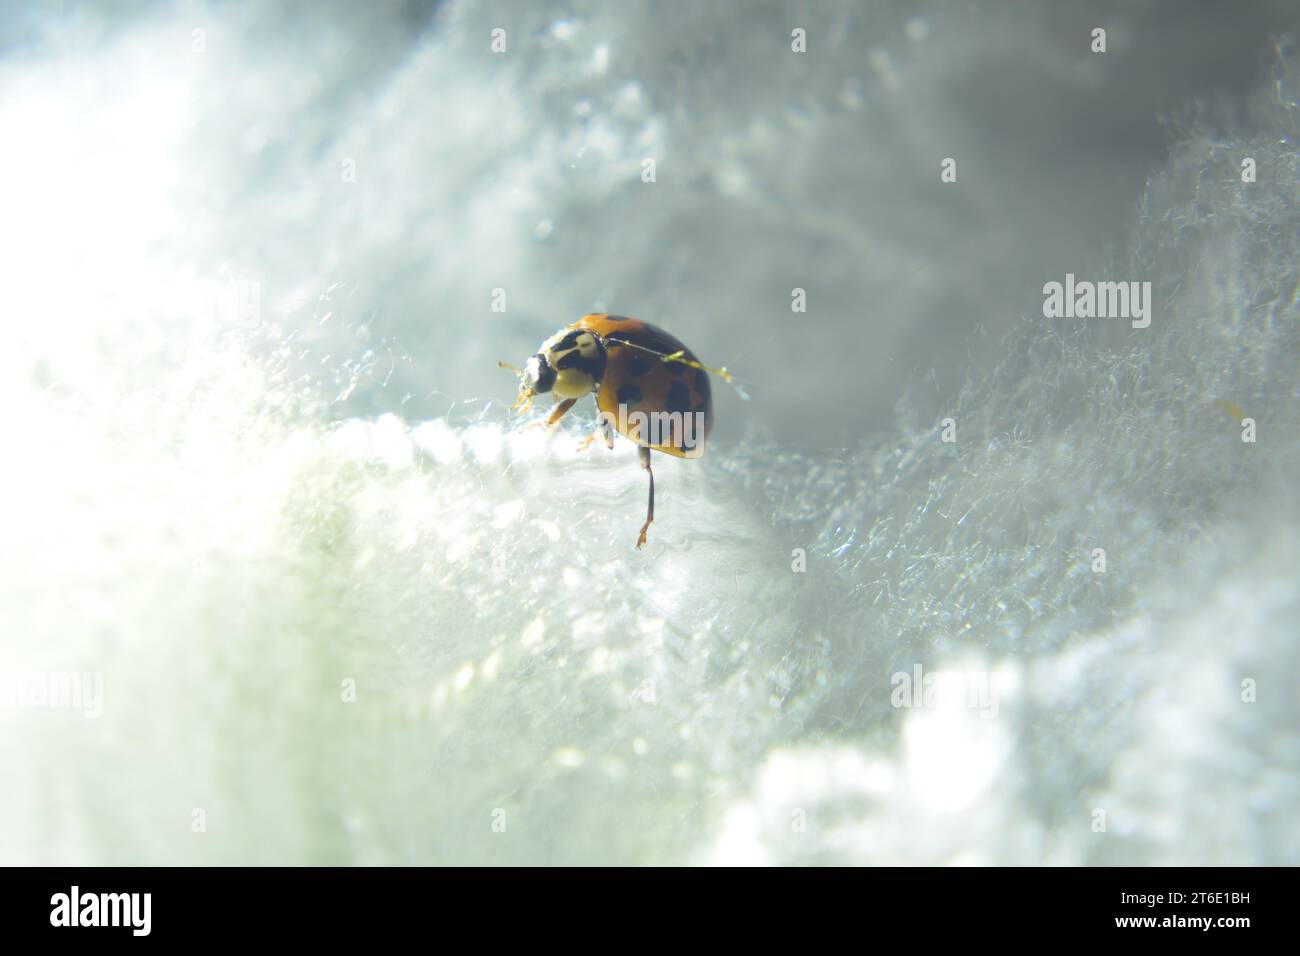 Close-up of a ladybird (ladybug) crawling over a mound of cotton resembling a fluffy white cloud. Stock Photo